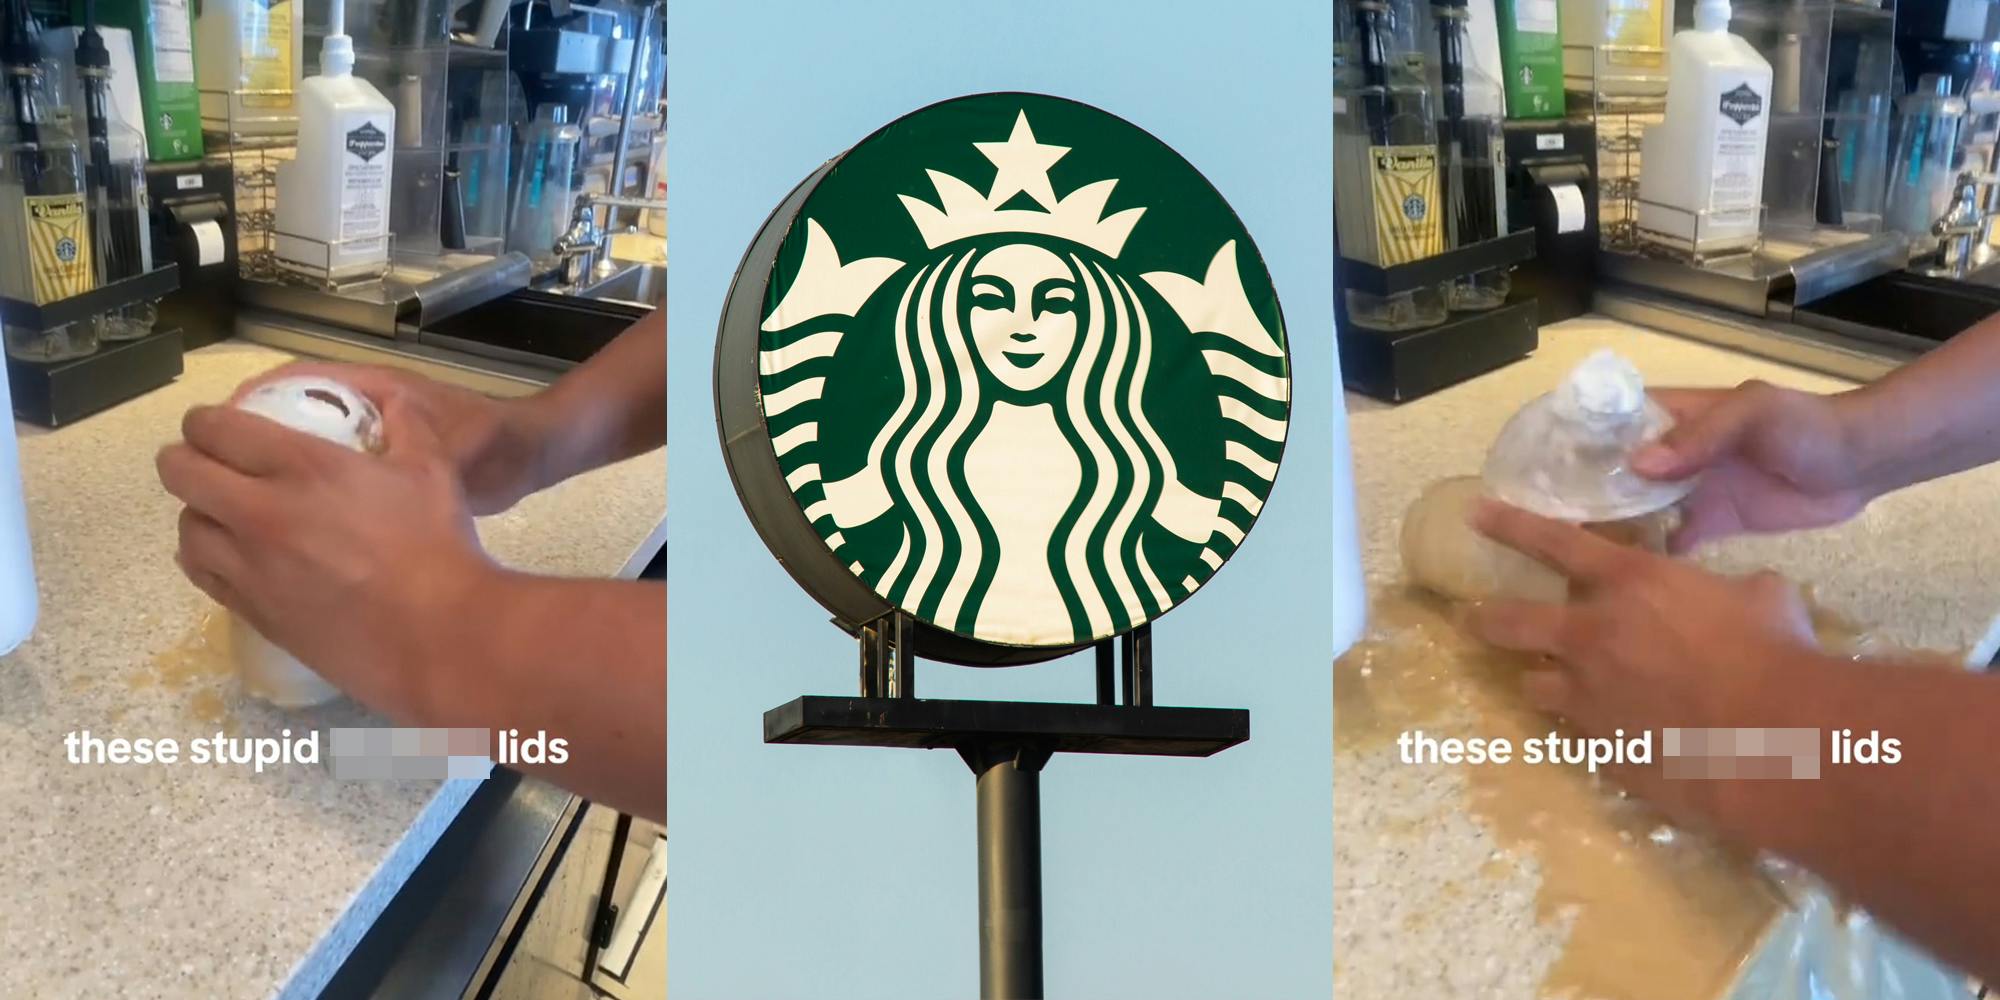 Starbucks employee pressing lid down onto cup with caption "these stupid blank lids" (l) Starbucks sign in front of blue sky (c) Starbucks employee pressing lid down onto cup with drink spilled with caption "these stupid blank lids" (r)